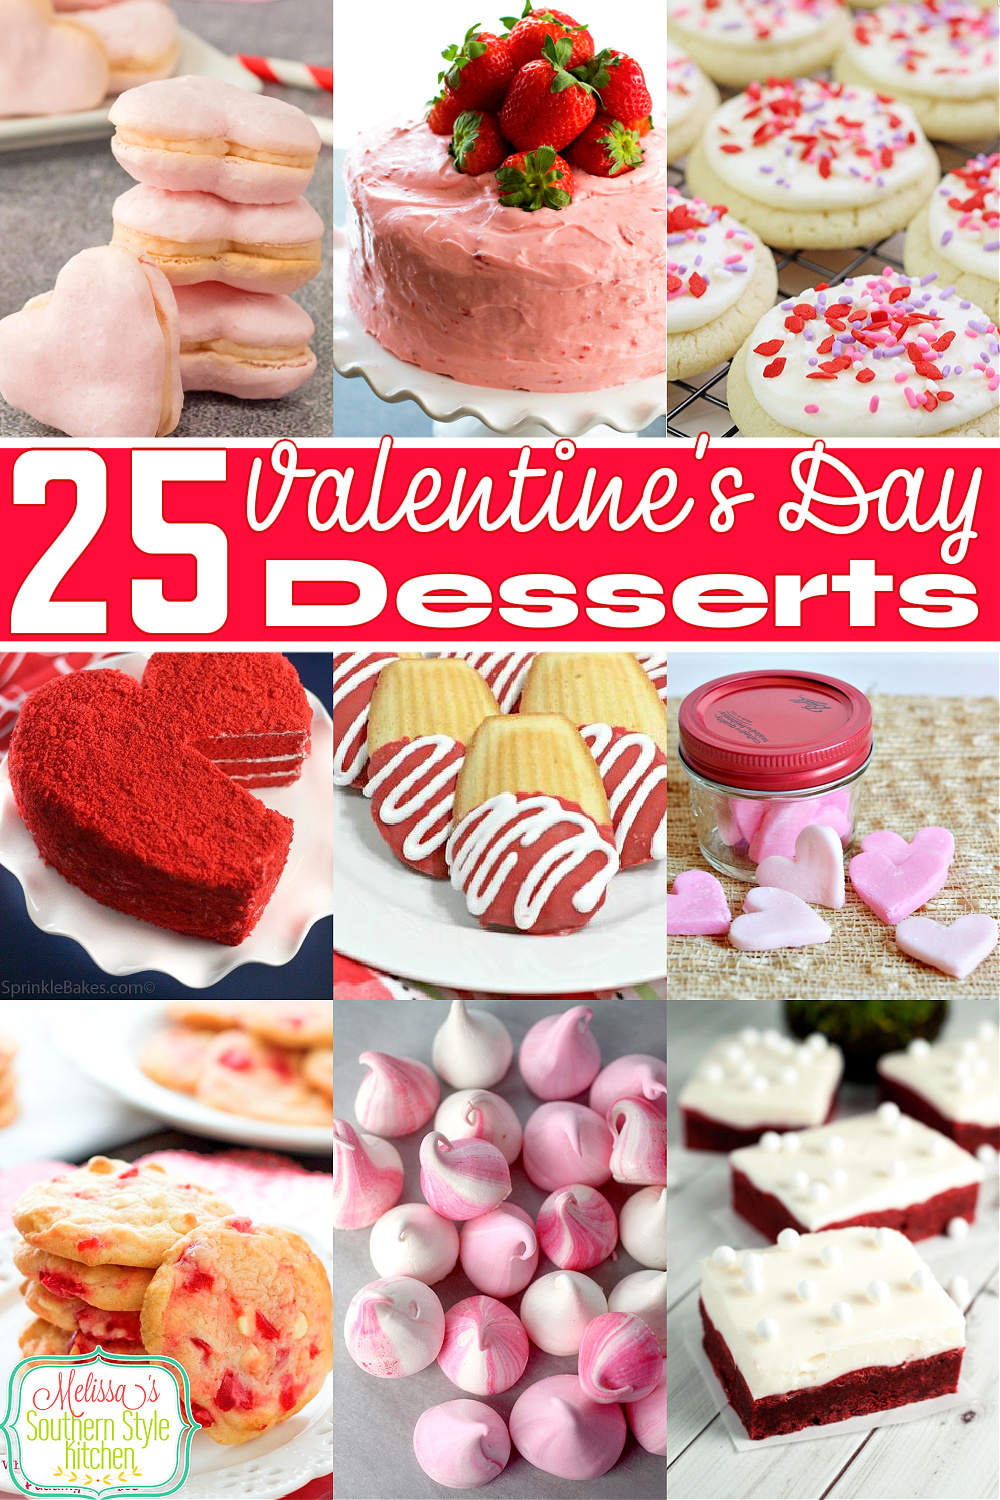 Show the love with this collection of 25 of the BEST Valentine's Day Desserts #candyh #cake #valentinesday #desserts #dessertfoodrecipes #sweets #sweetfix #southernrecipes #chocolate #chocolatecake via @melissasssk